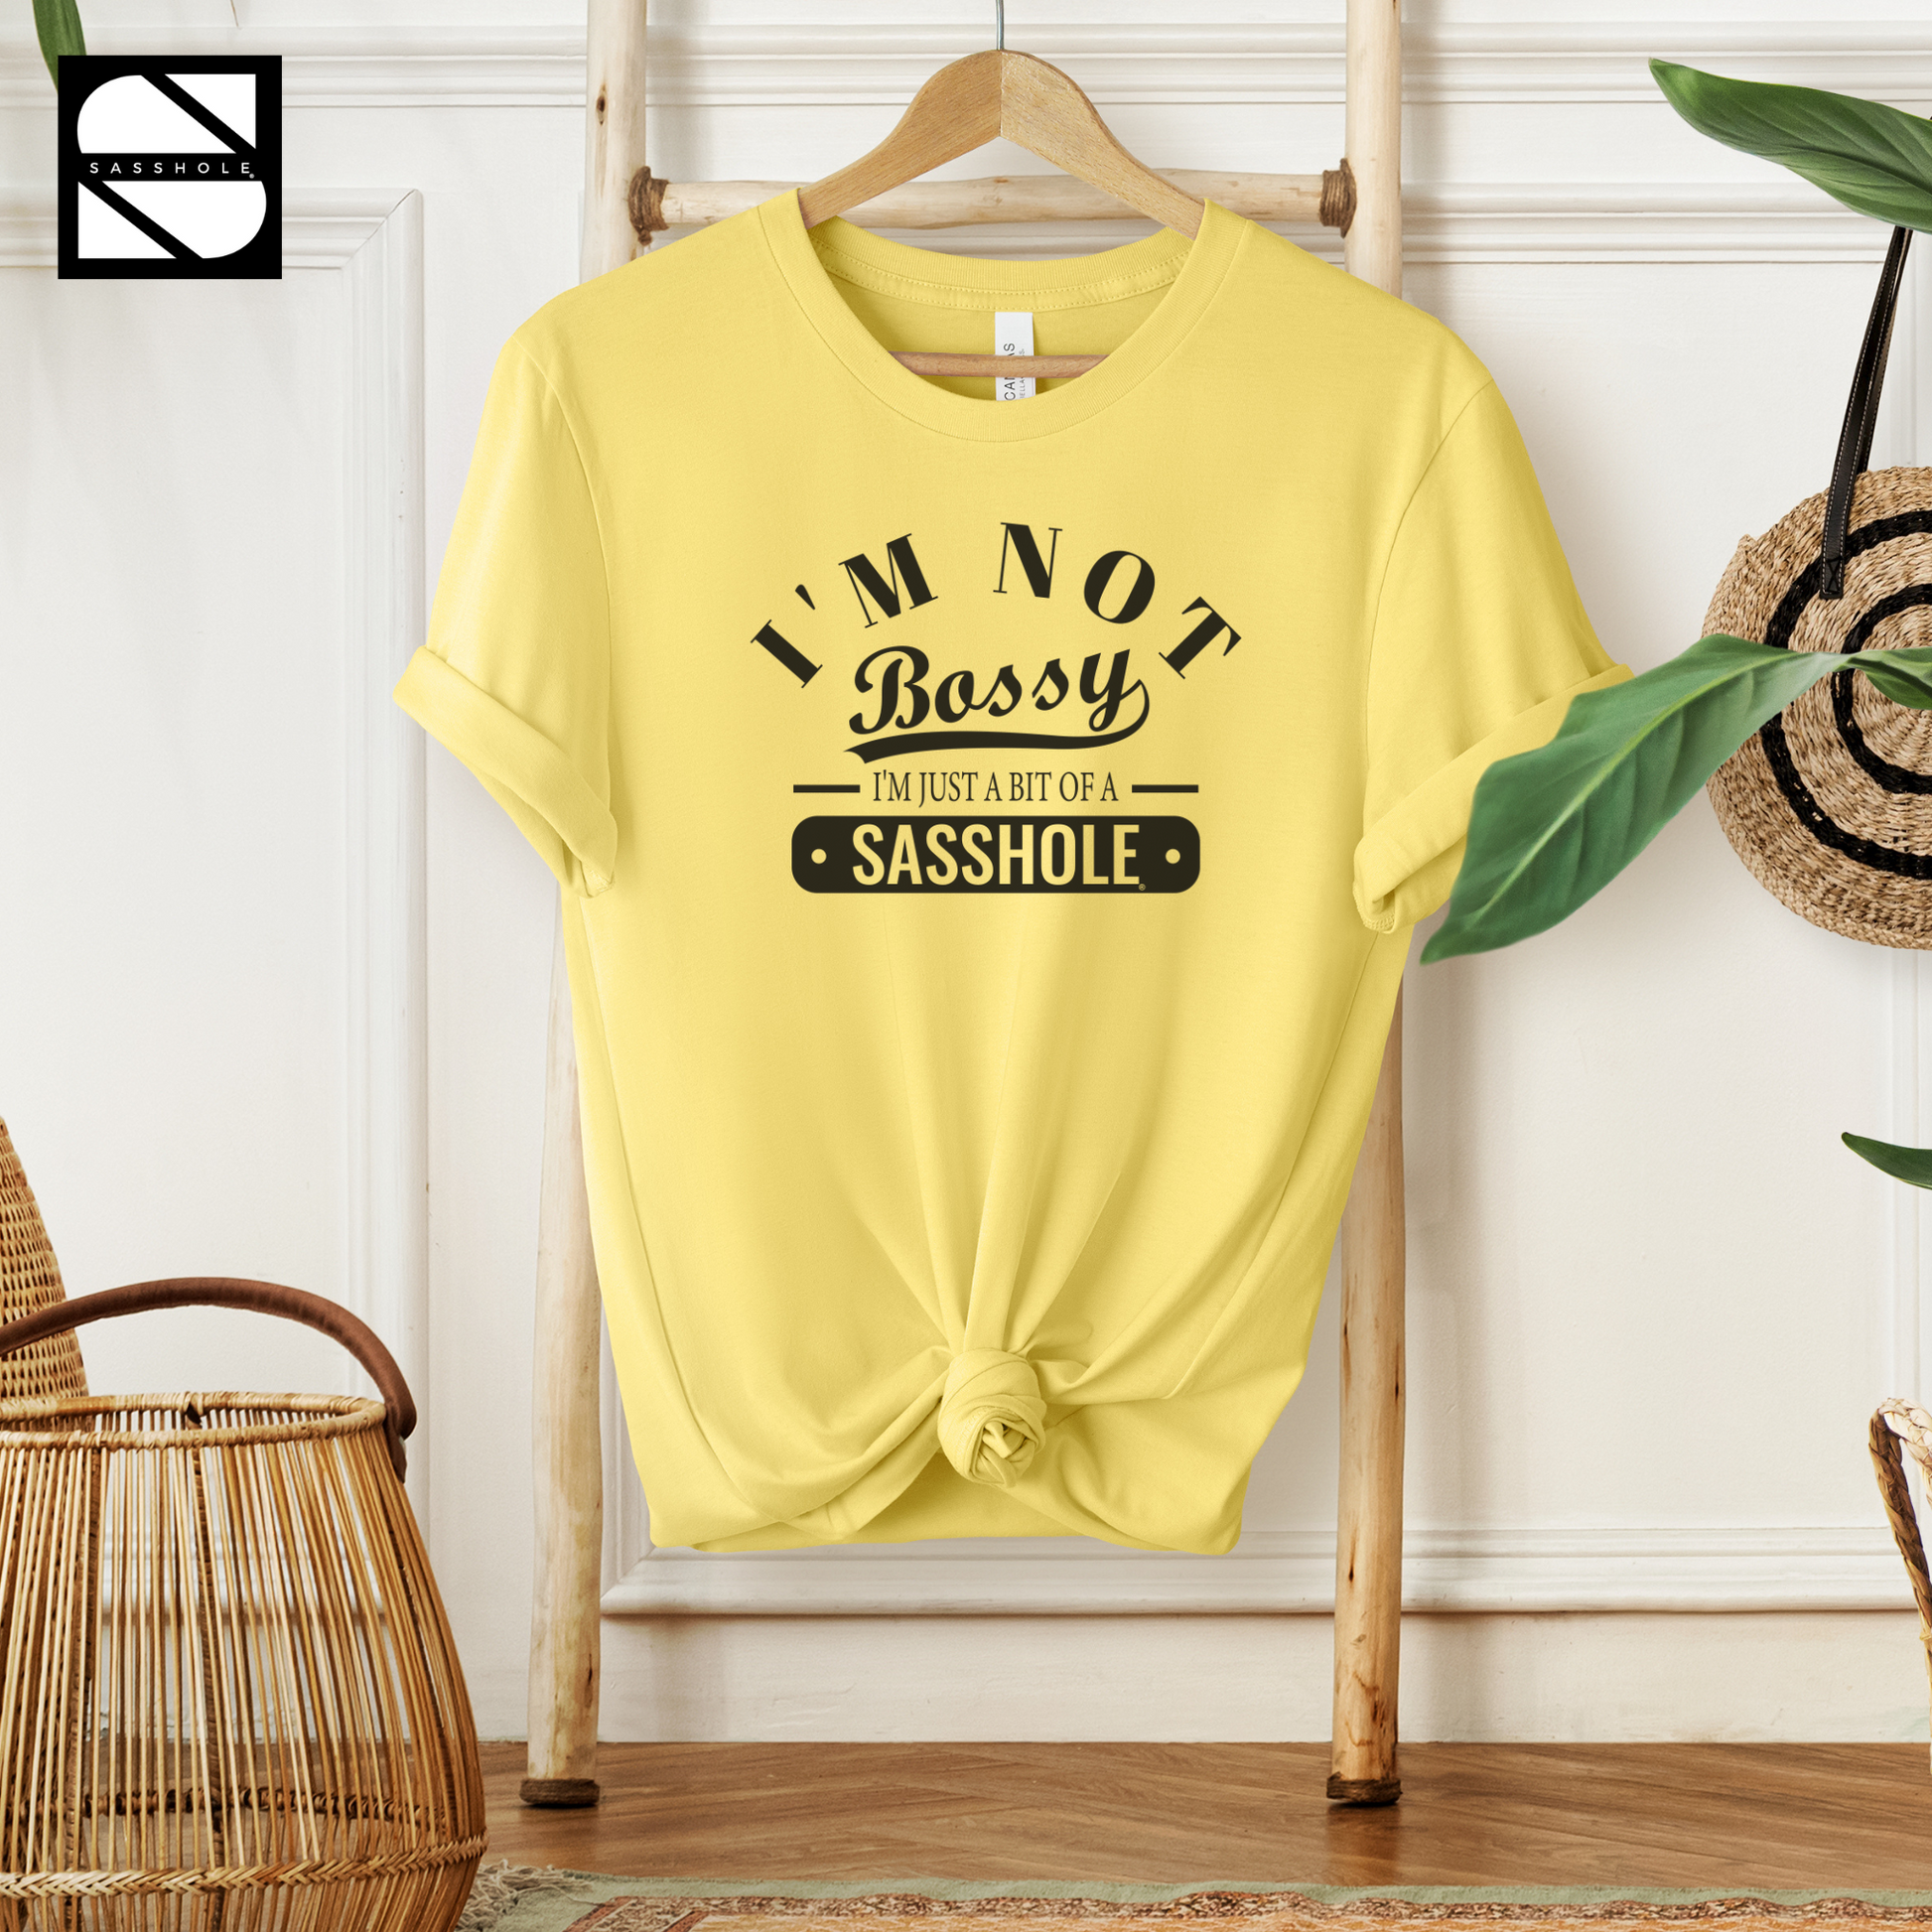 yellow graphic tees, womens white tee shirt, womens white t shirt, womens t shirts, womens soft tee shirts, womens shirts funny, womens shirts, womens shirt, womens plus size t shirts, womens oversized t shirts, womens graphic tees, women's funny tshirts, Women's Clothing, women's apparel, women funny tshirts, white graphic tees, Unisex, tshirts, tshirt ideas, teal graphic tees